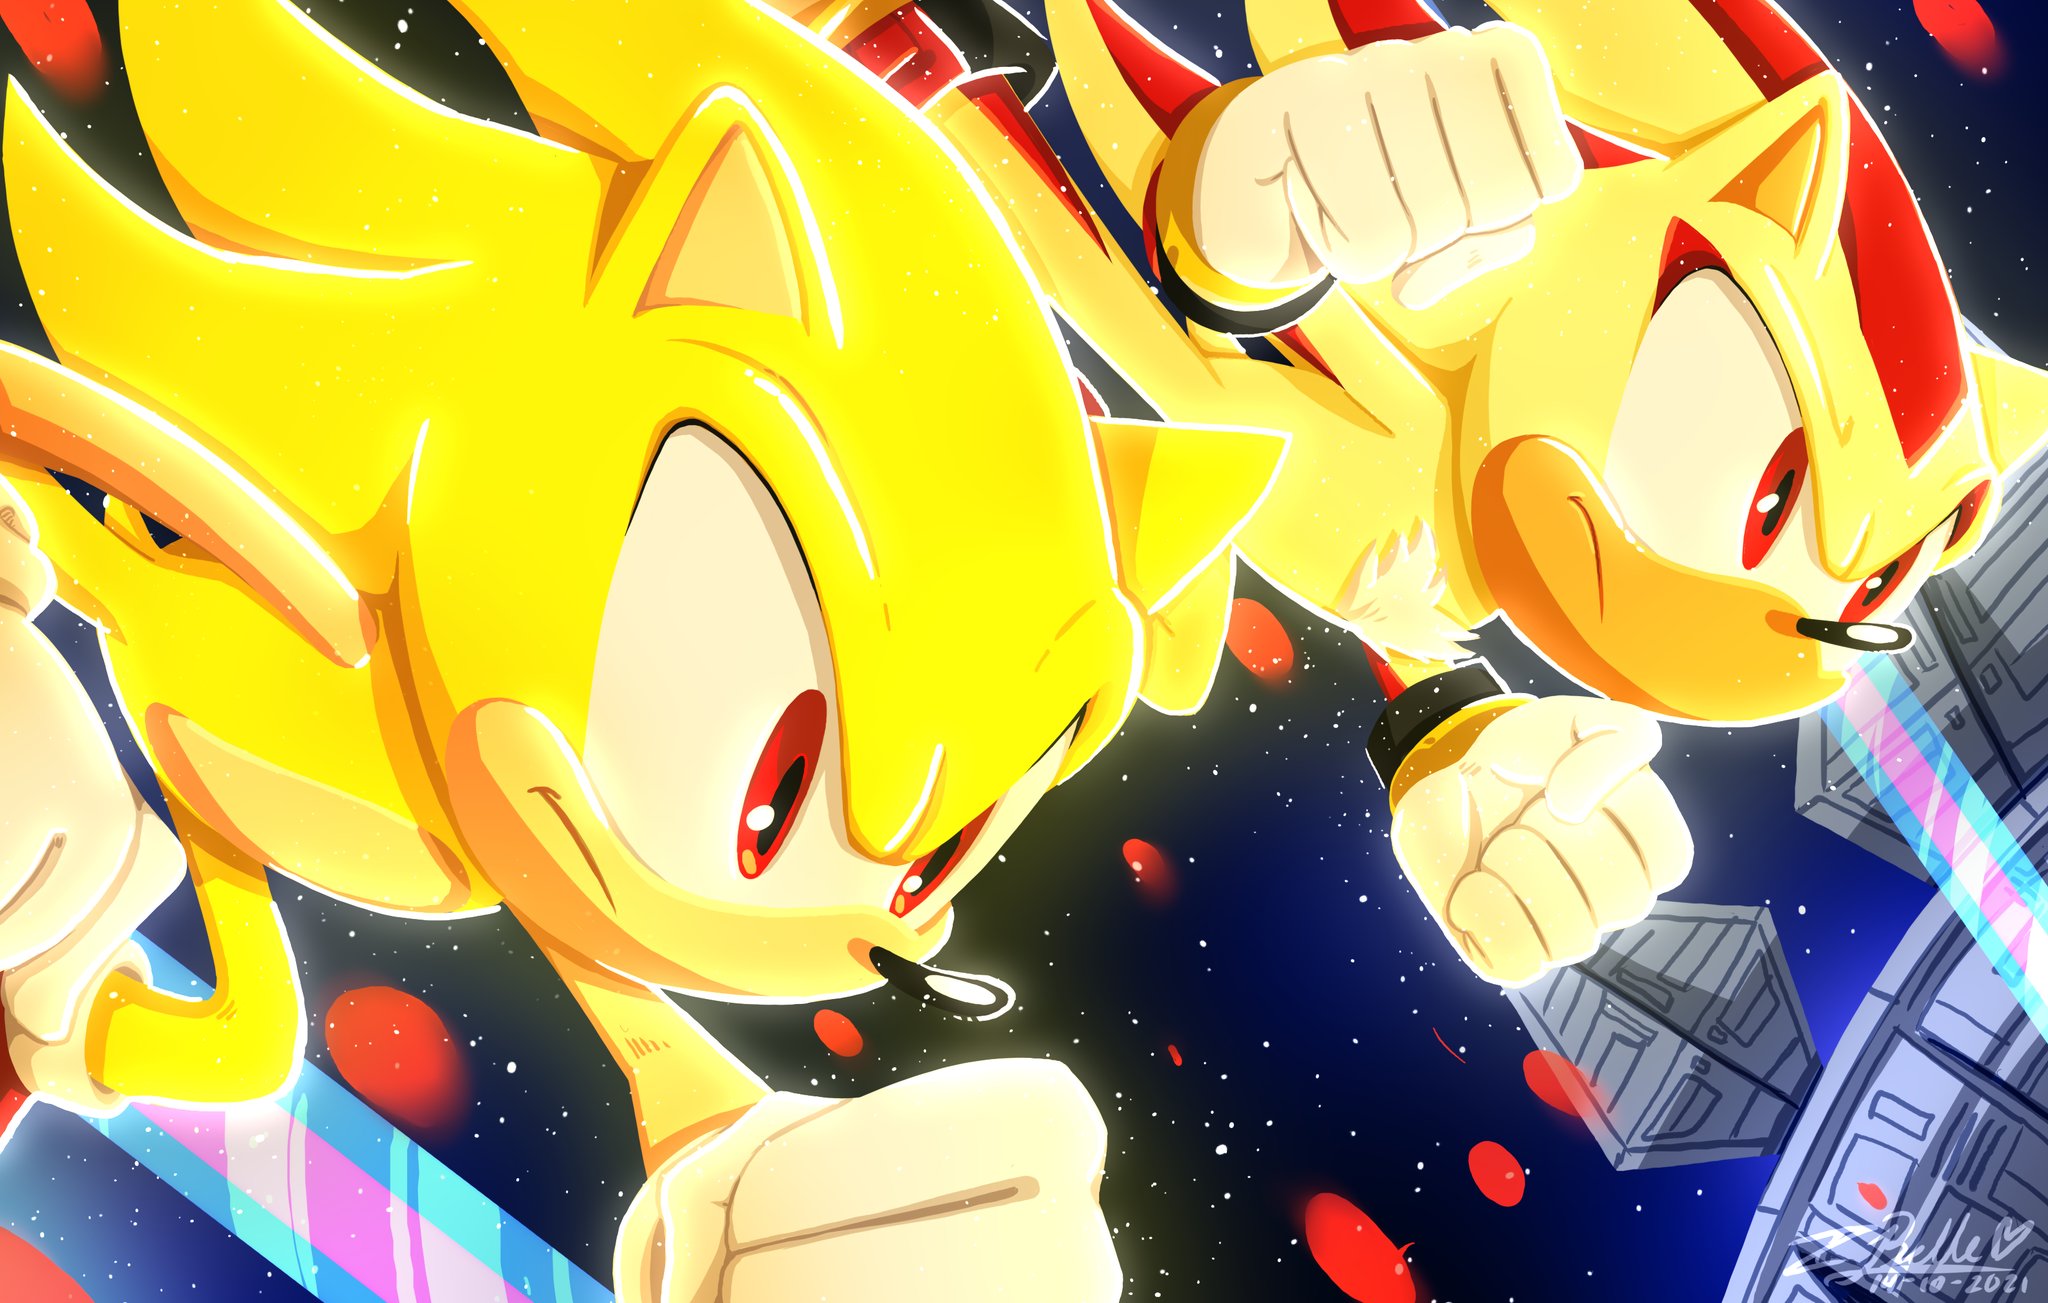 sonic x super sonic and super shadow vs the final hazard